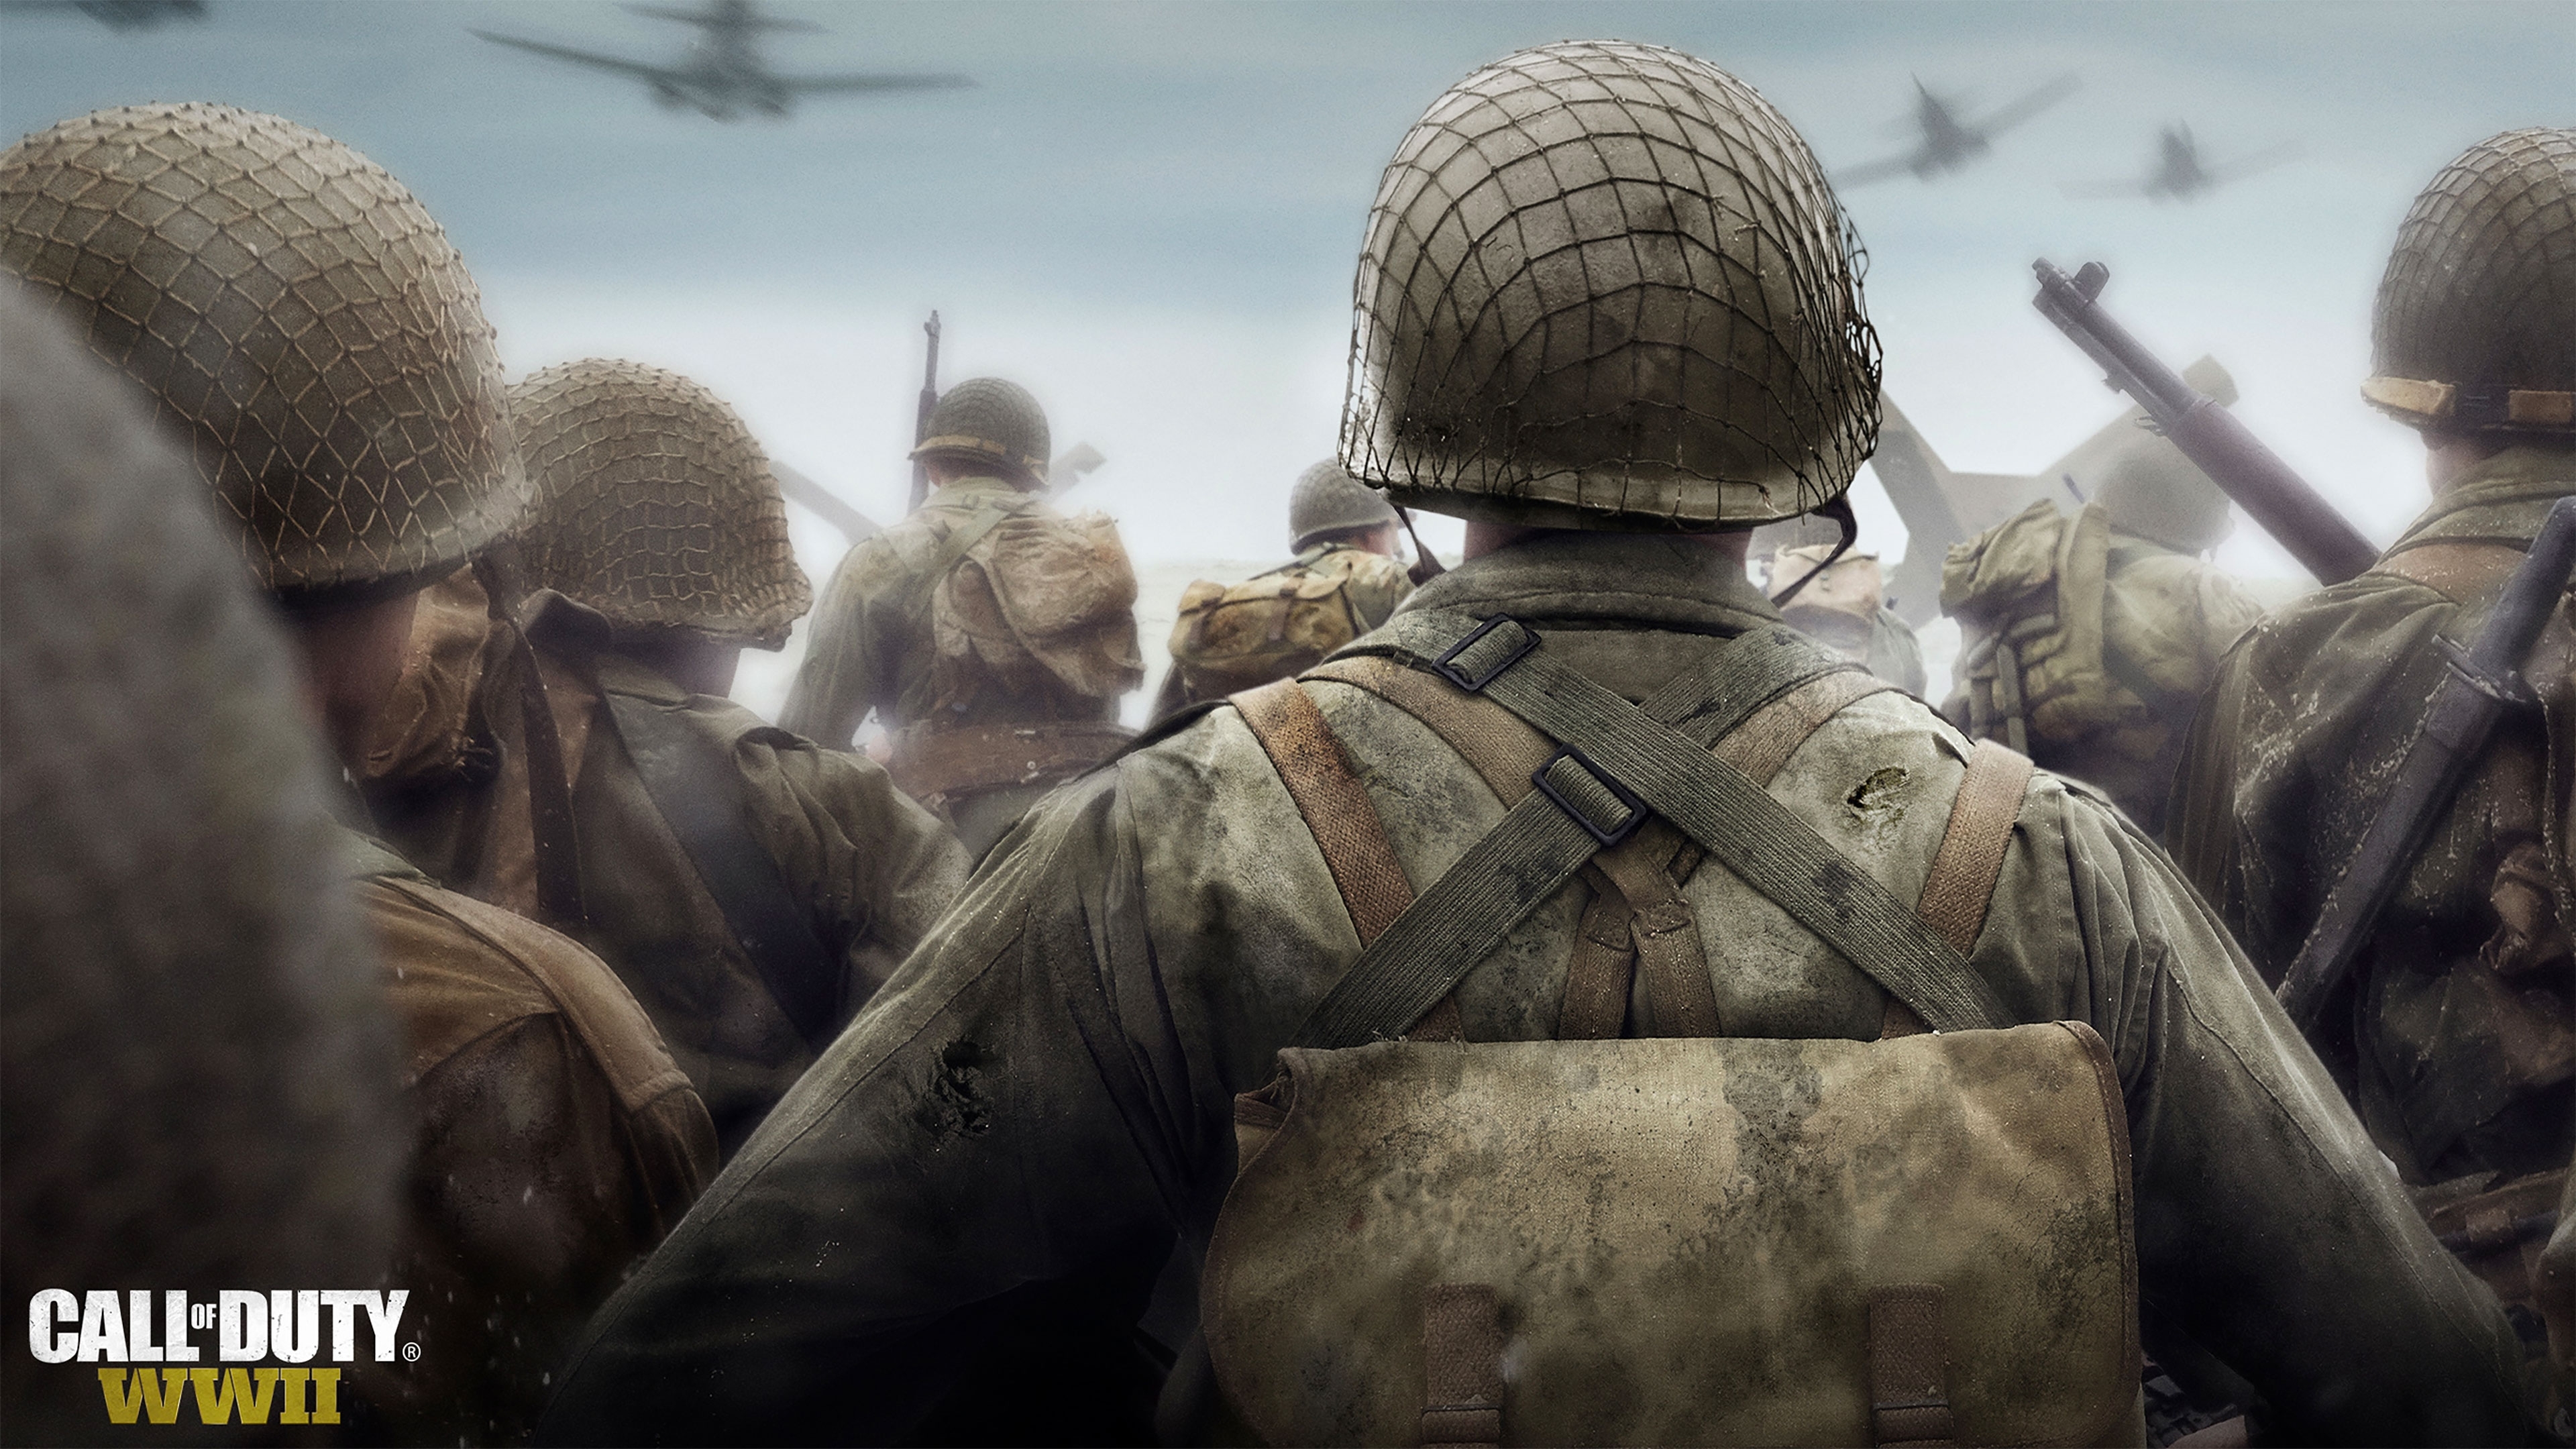 call of duty wwii wallpapers in ultra hd | 4k